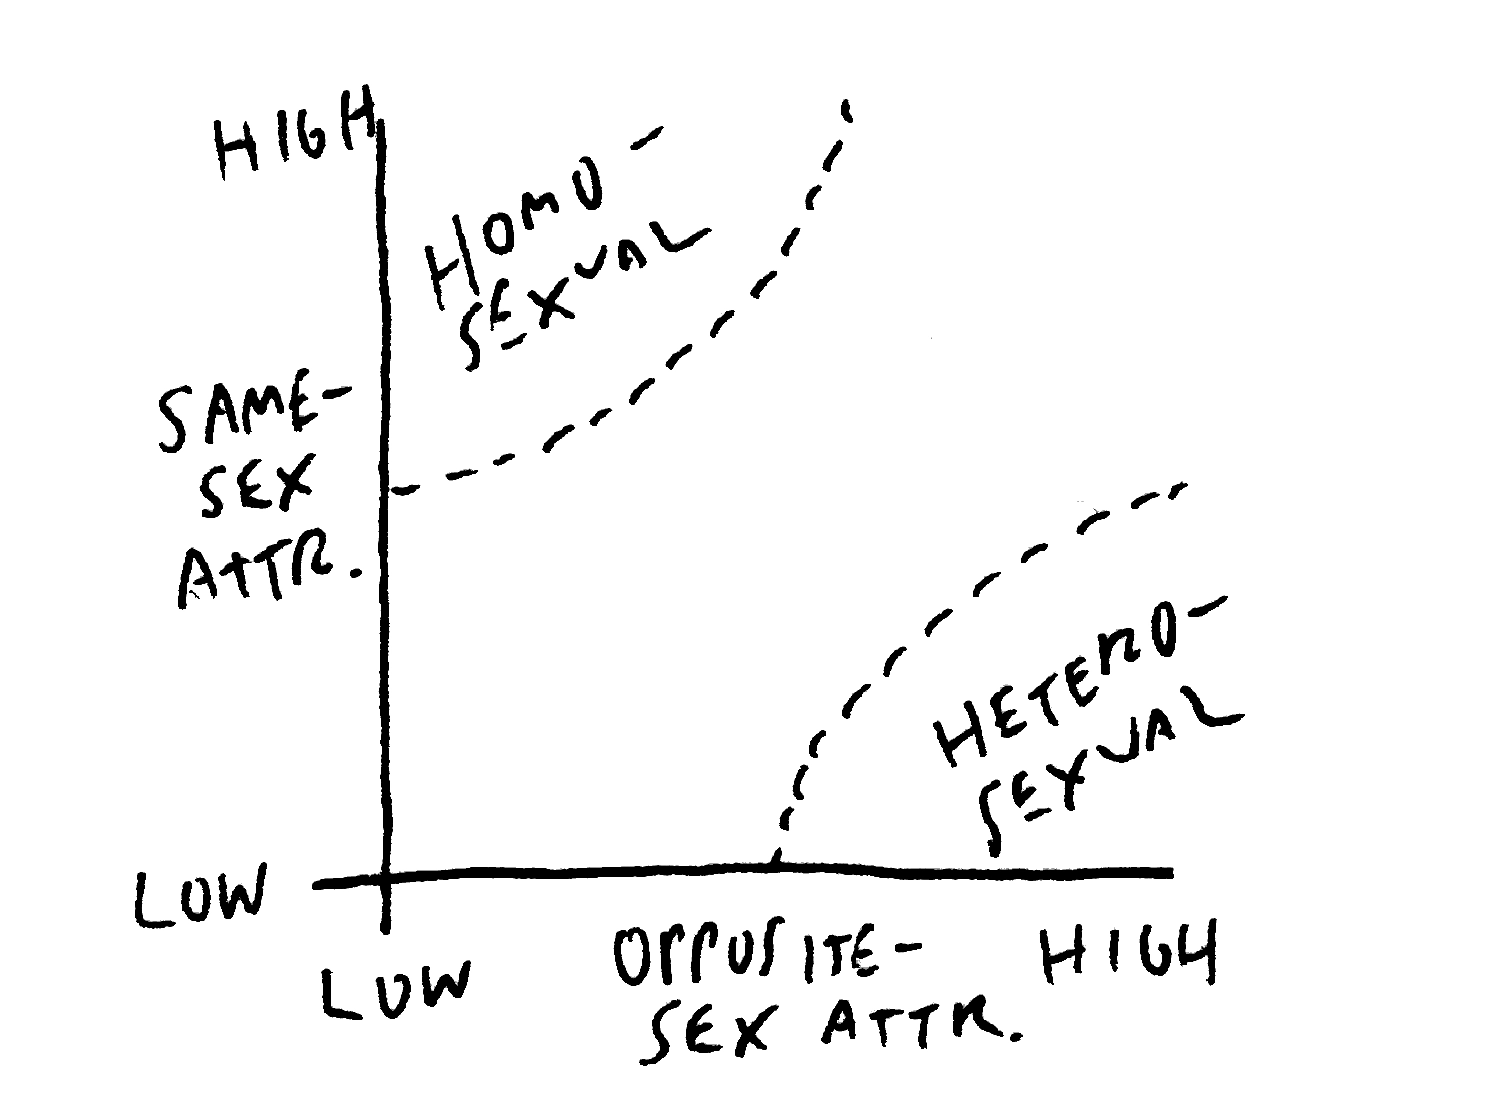 This hand-sketched diagram has two axes, same-sex attraction from low to high, and opposite-sex attraction from low to high. The diagonal region is shaded, and in the low same- and opposite- sex attraction region, it says asexual. Under high same- and opposite-sex attraction, it says bisexual. Note these two labeled regions are connected, implying there is a gradient between the two. Under high same-sex and low opposite-sex attraction, the region is labeled heterosexual. Under high opposite-sex and low same-sex attraction, it says heterosexual. The hetero- and homo- sexual regions are separated with dashed lines suggesting there is not a single cut-off between the regions.